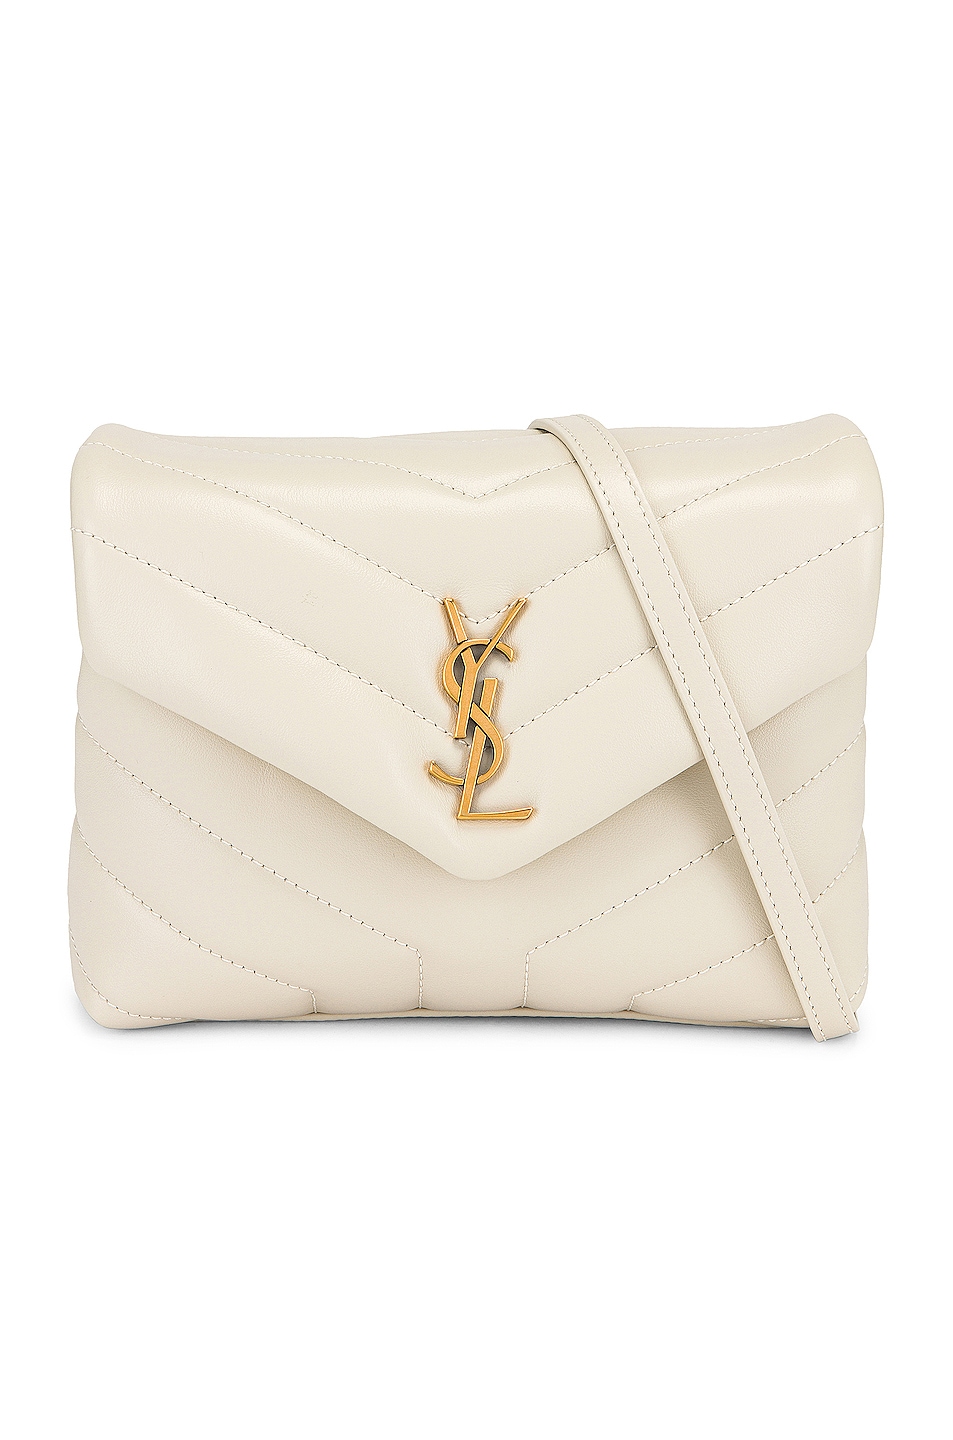 Toy Loulou Bag in Cream